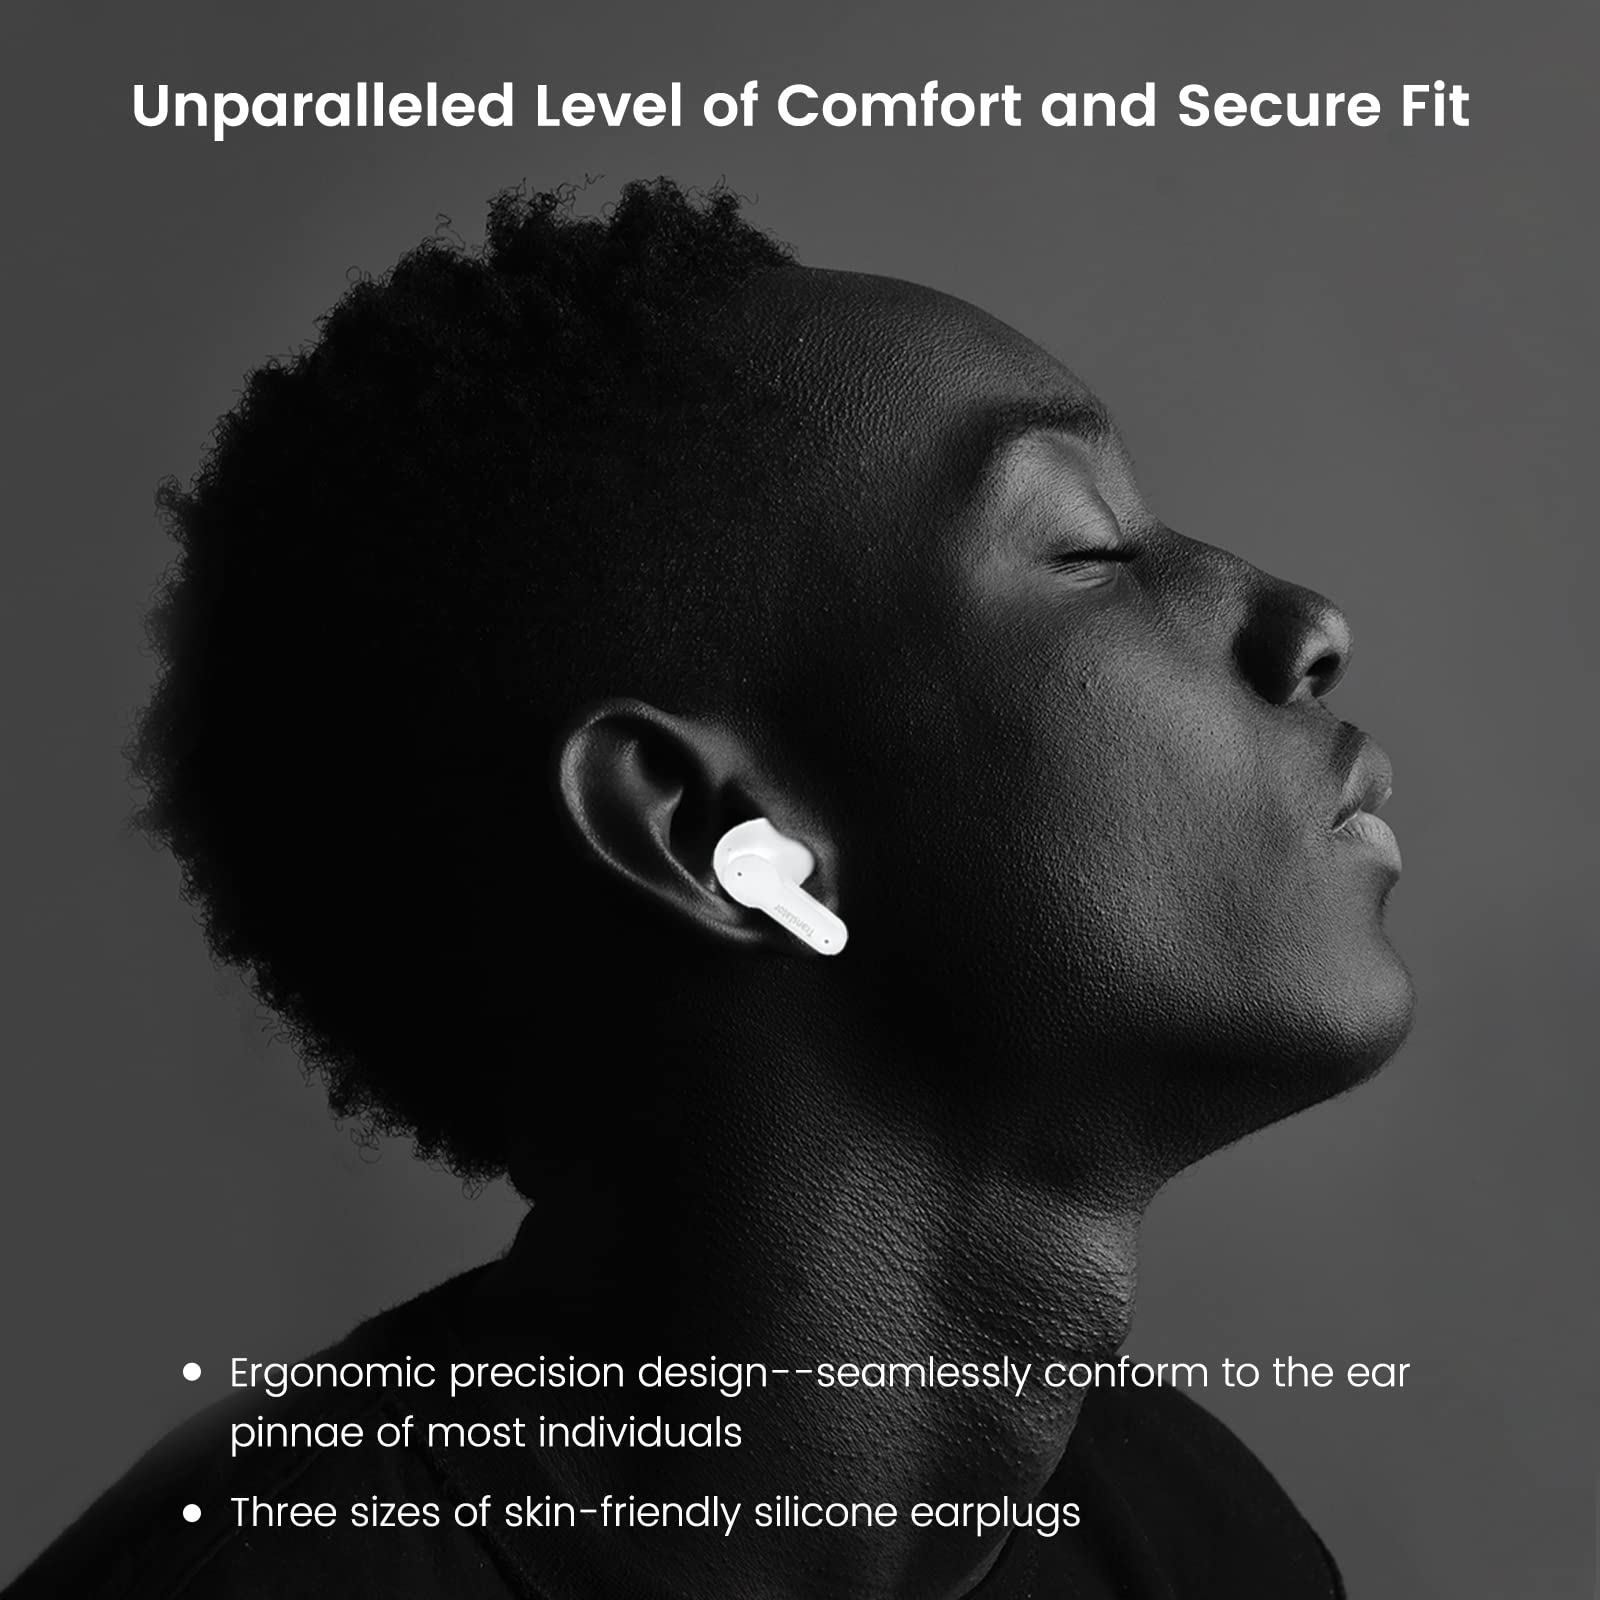 Wooask M3 Translator Earbuds for Voice Language Translation in 74 Languages and 70 Accents Quick Response with 97% High Accuracy Innovative Sliding Design Perfect for Travel, Business & Daily Use